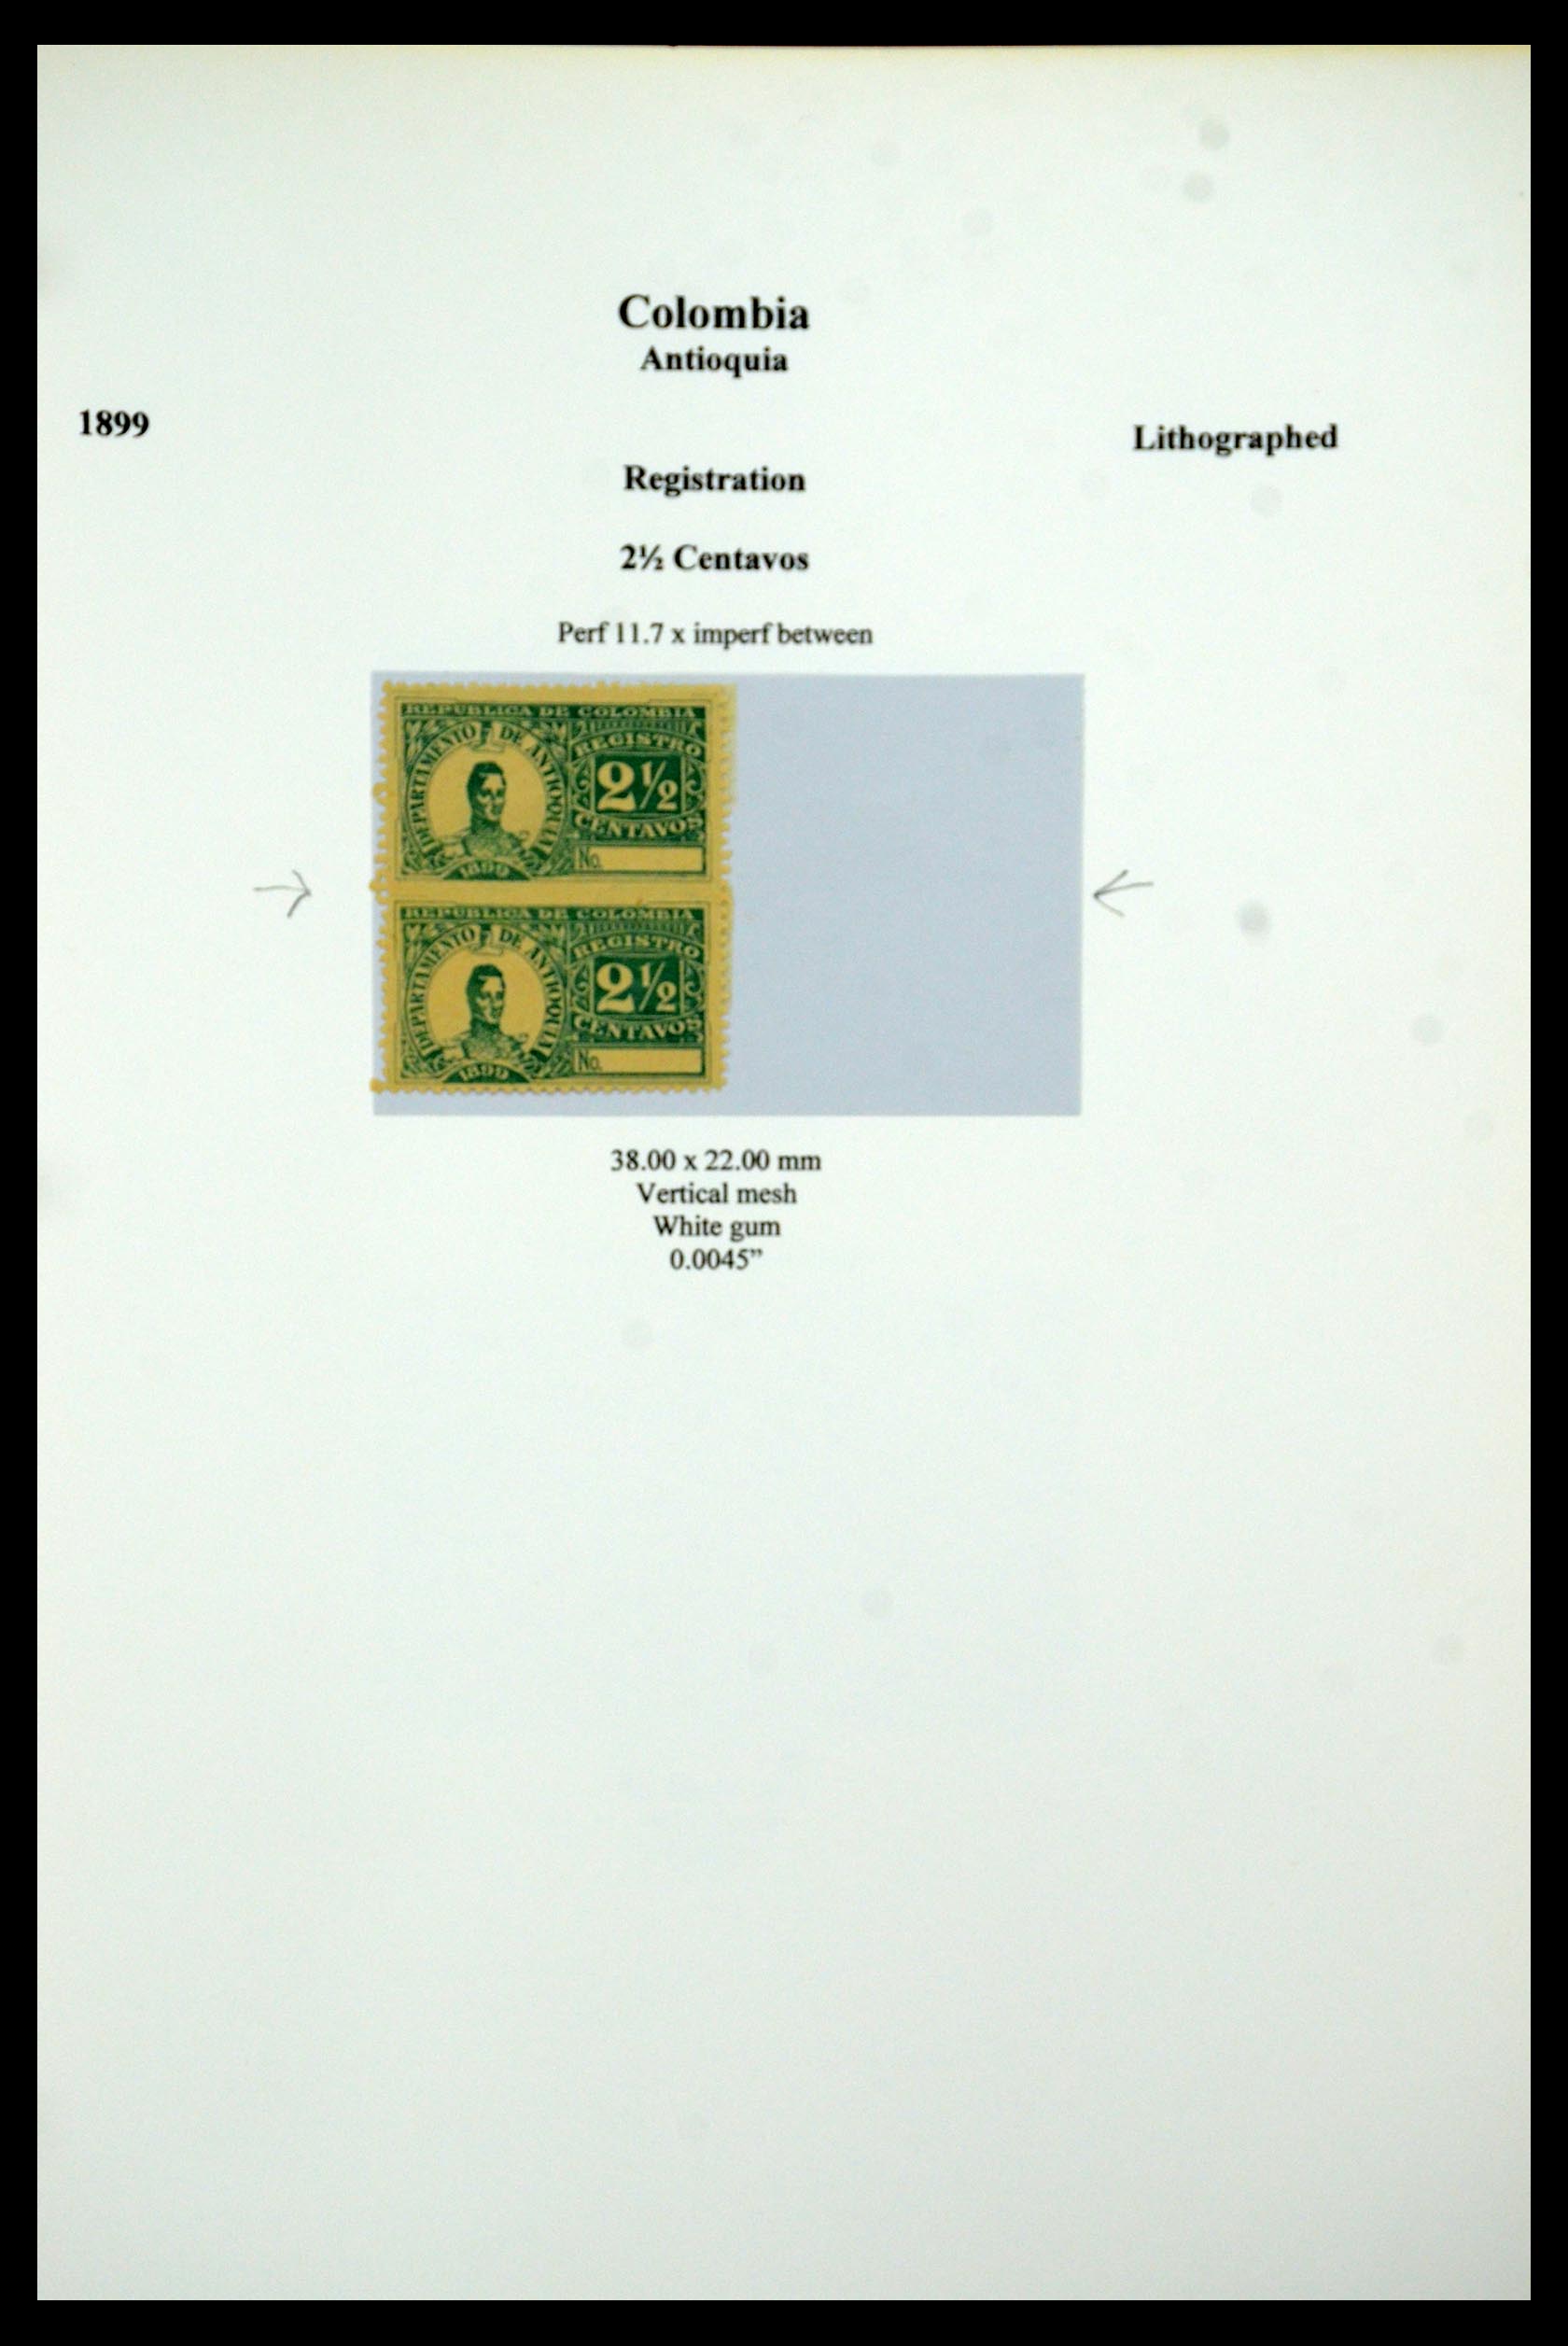 35519 075 - Stamp Collection 35519 Colombia Antioquia 1899.